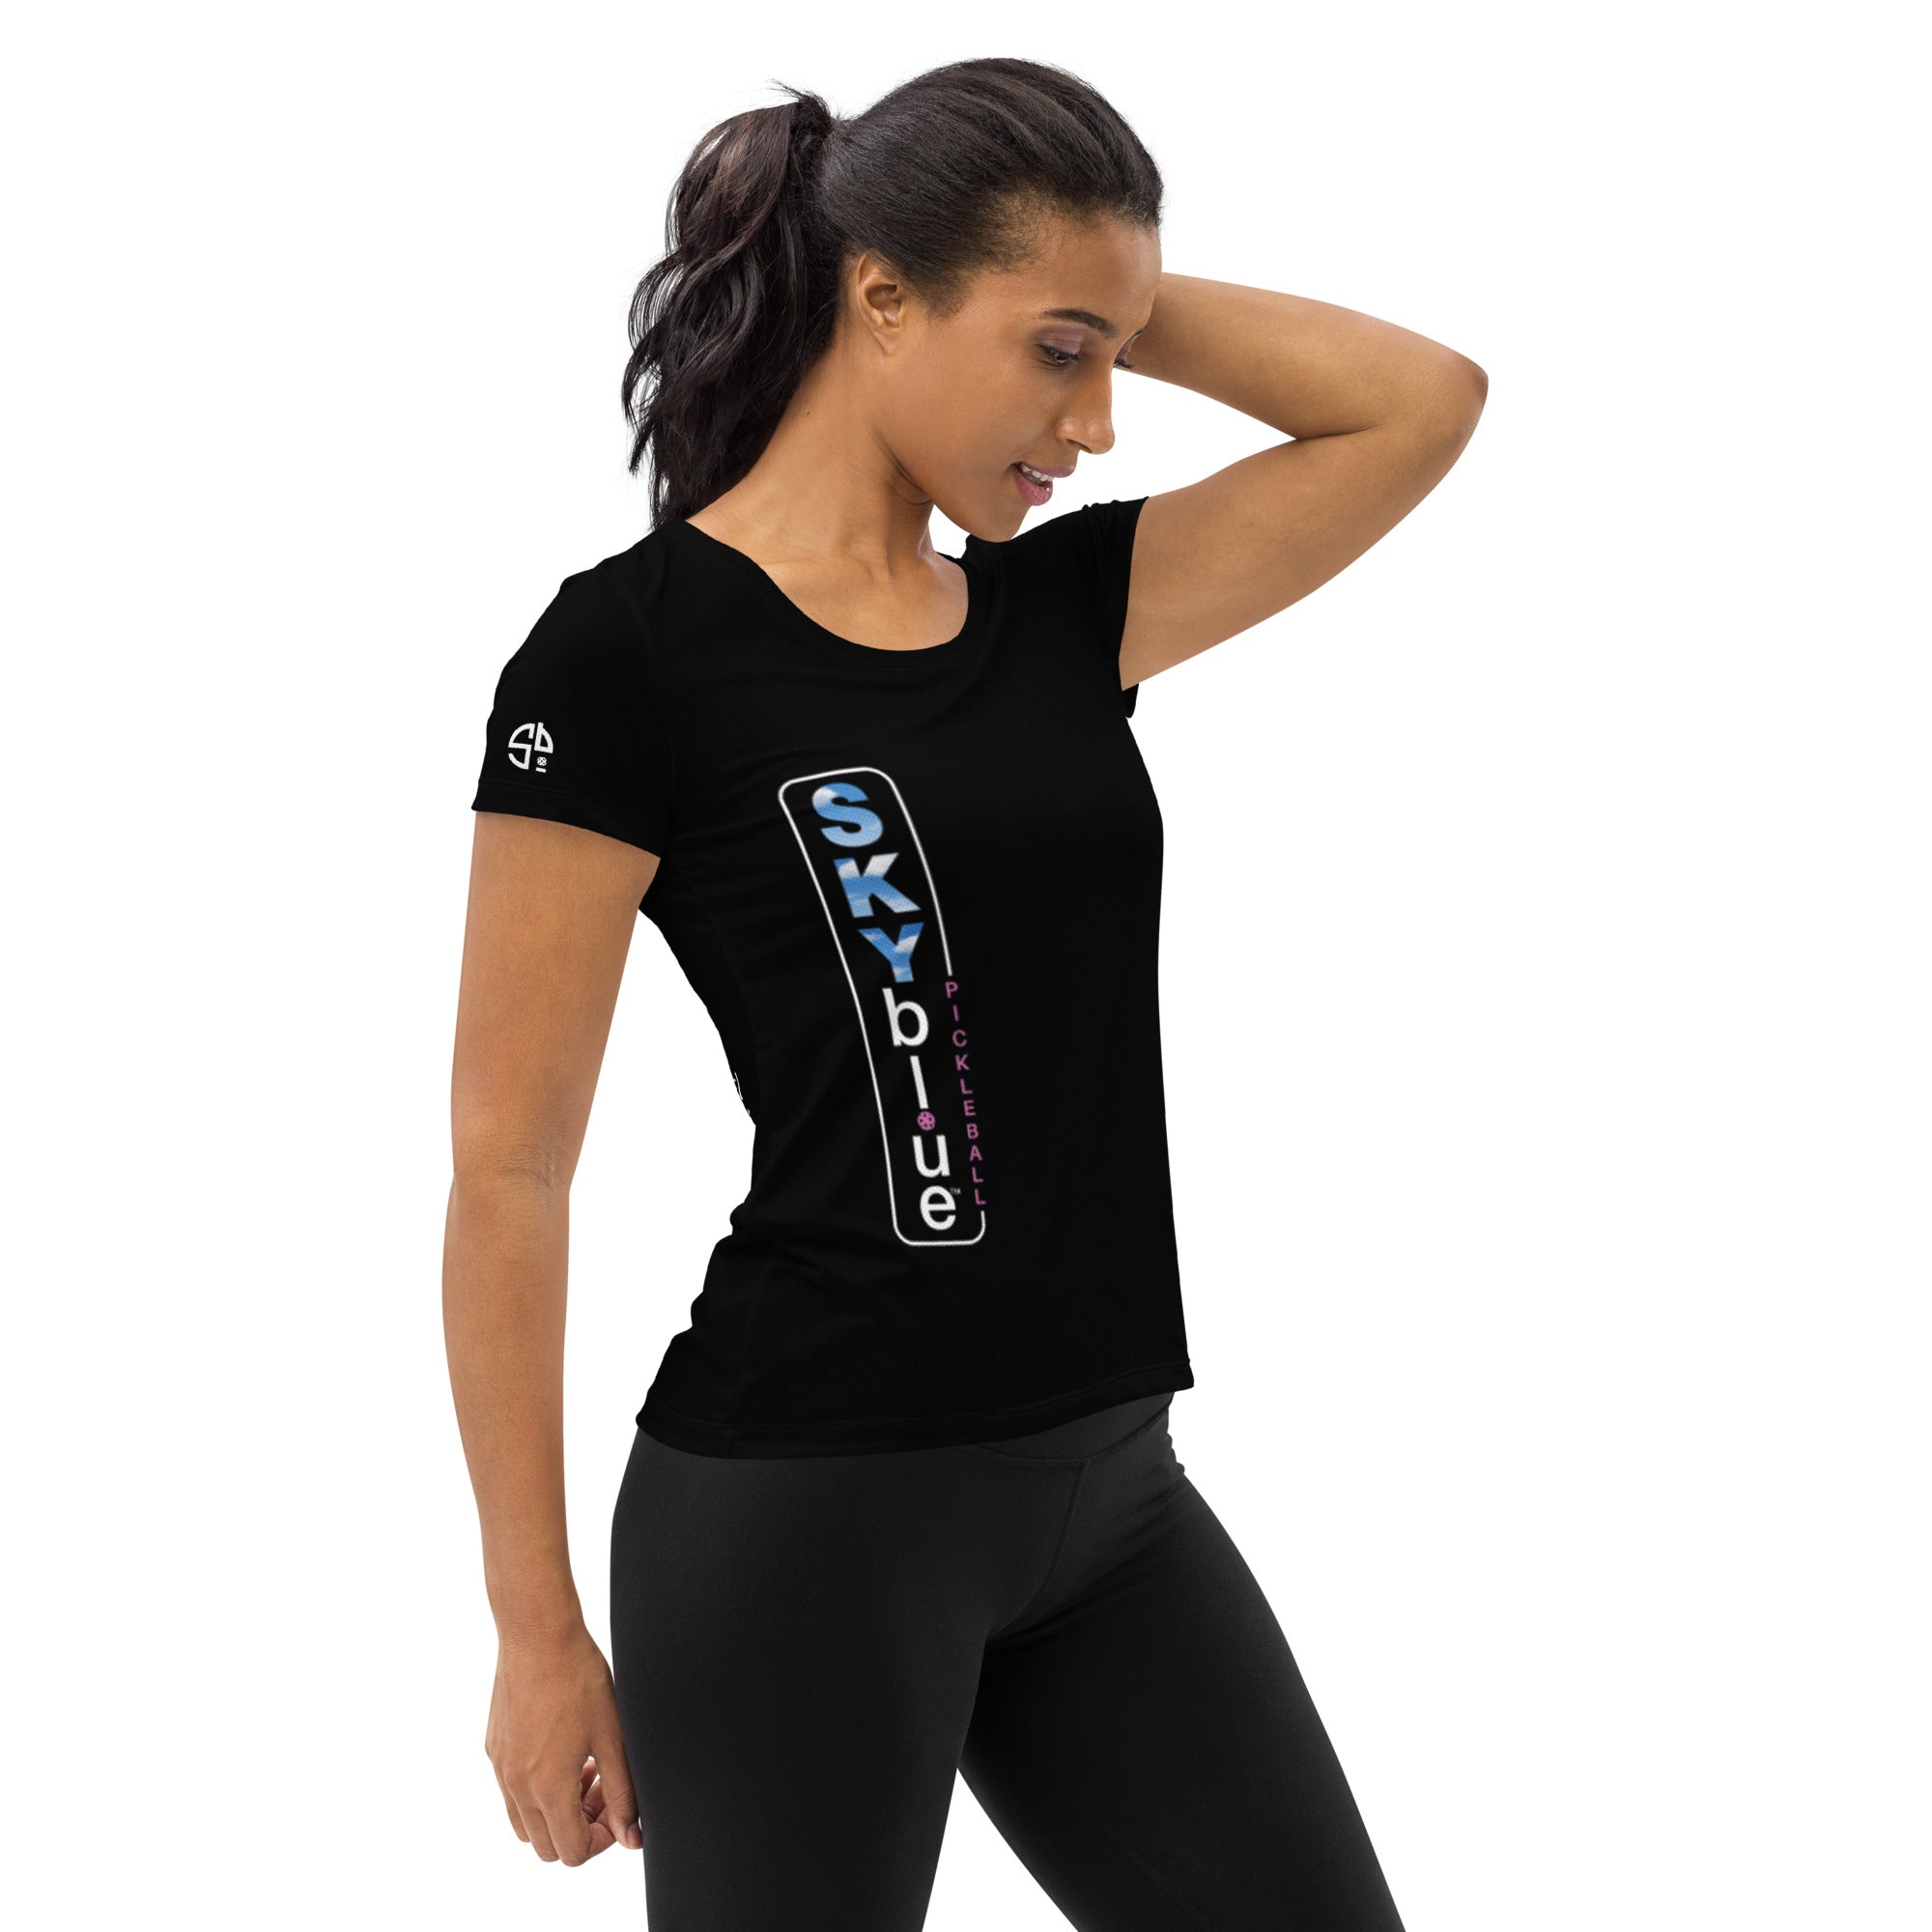 SKYblue™  Black Women's Performance Athletic T-Shirt for Pickleball Enthusiasts - Play Pickleball in Style!